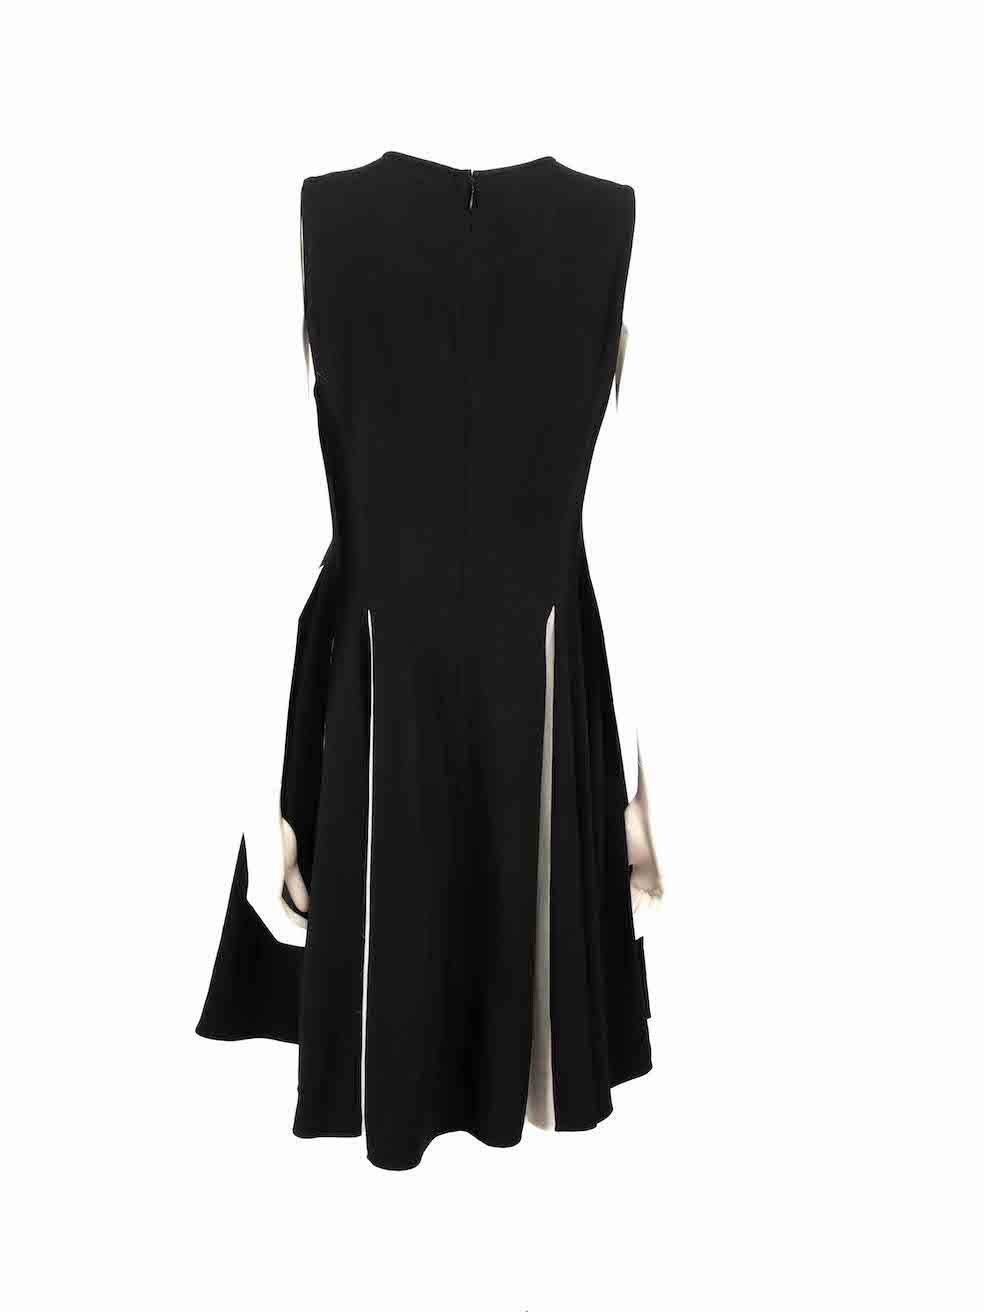 Proenza Schouler Black Flared Knee Length Dress Size S In Good Condition For Sale In London, GB